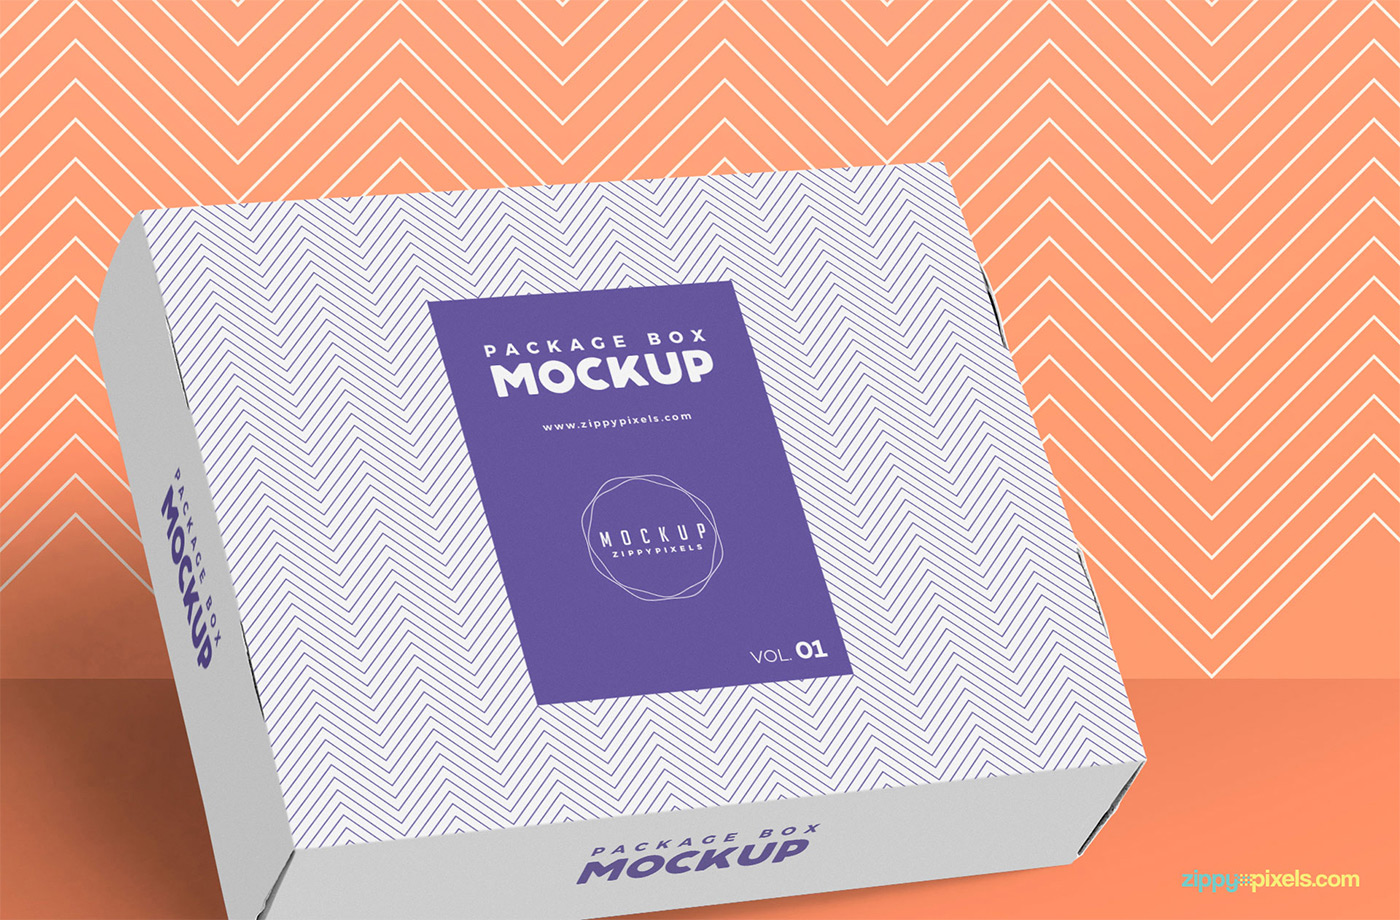 Download Free and Elegant Box Packaging Mockup by ZippyPixels on Dribbble